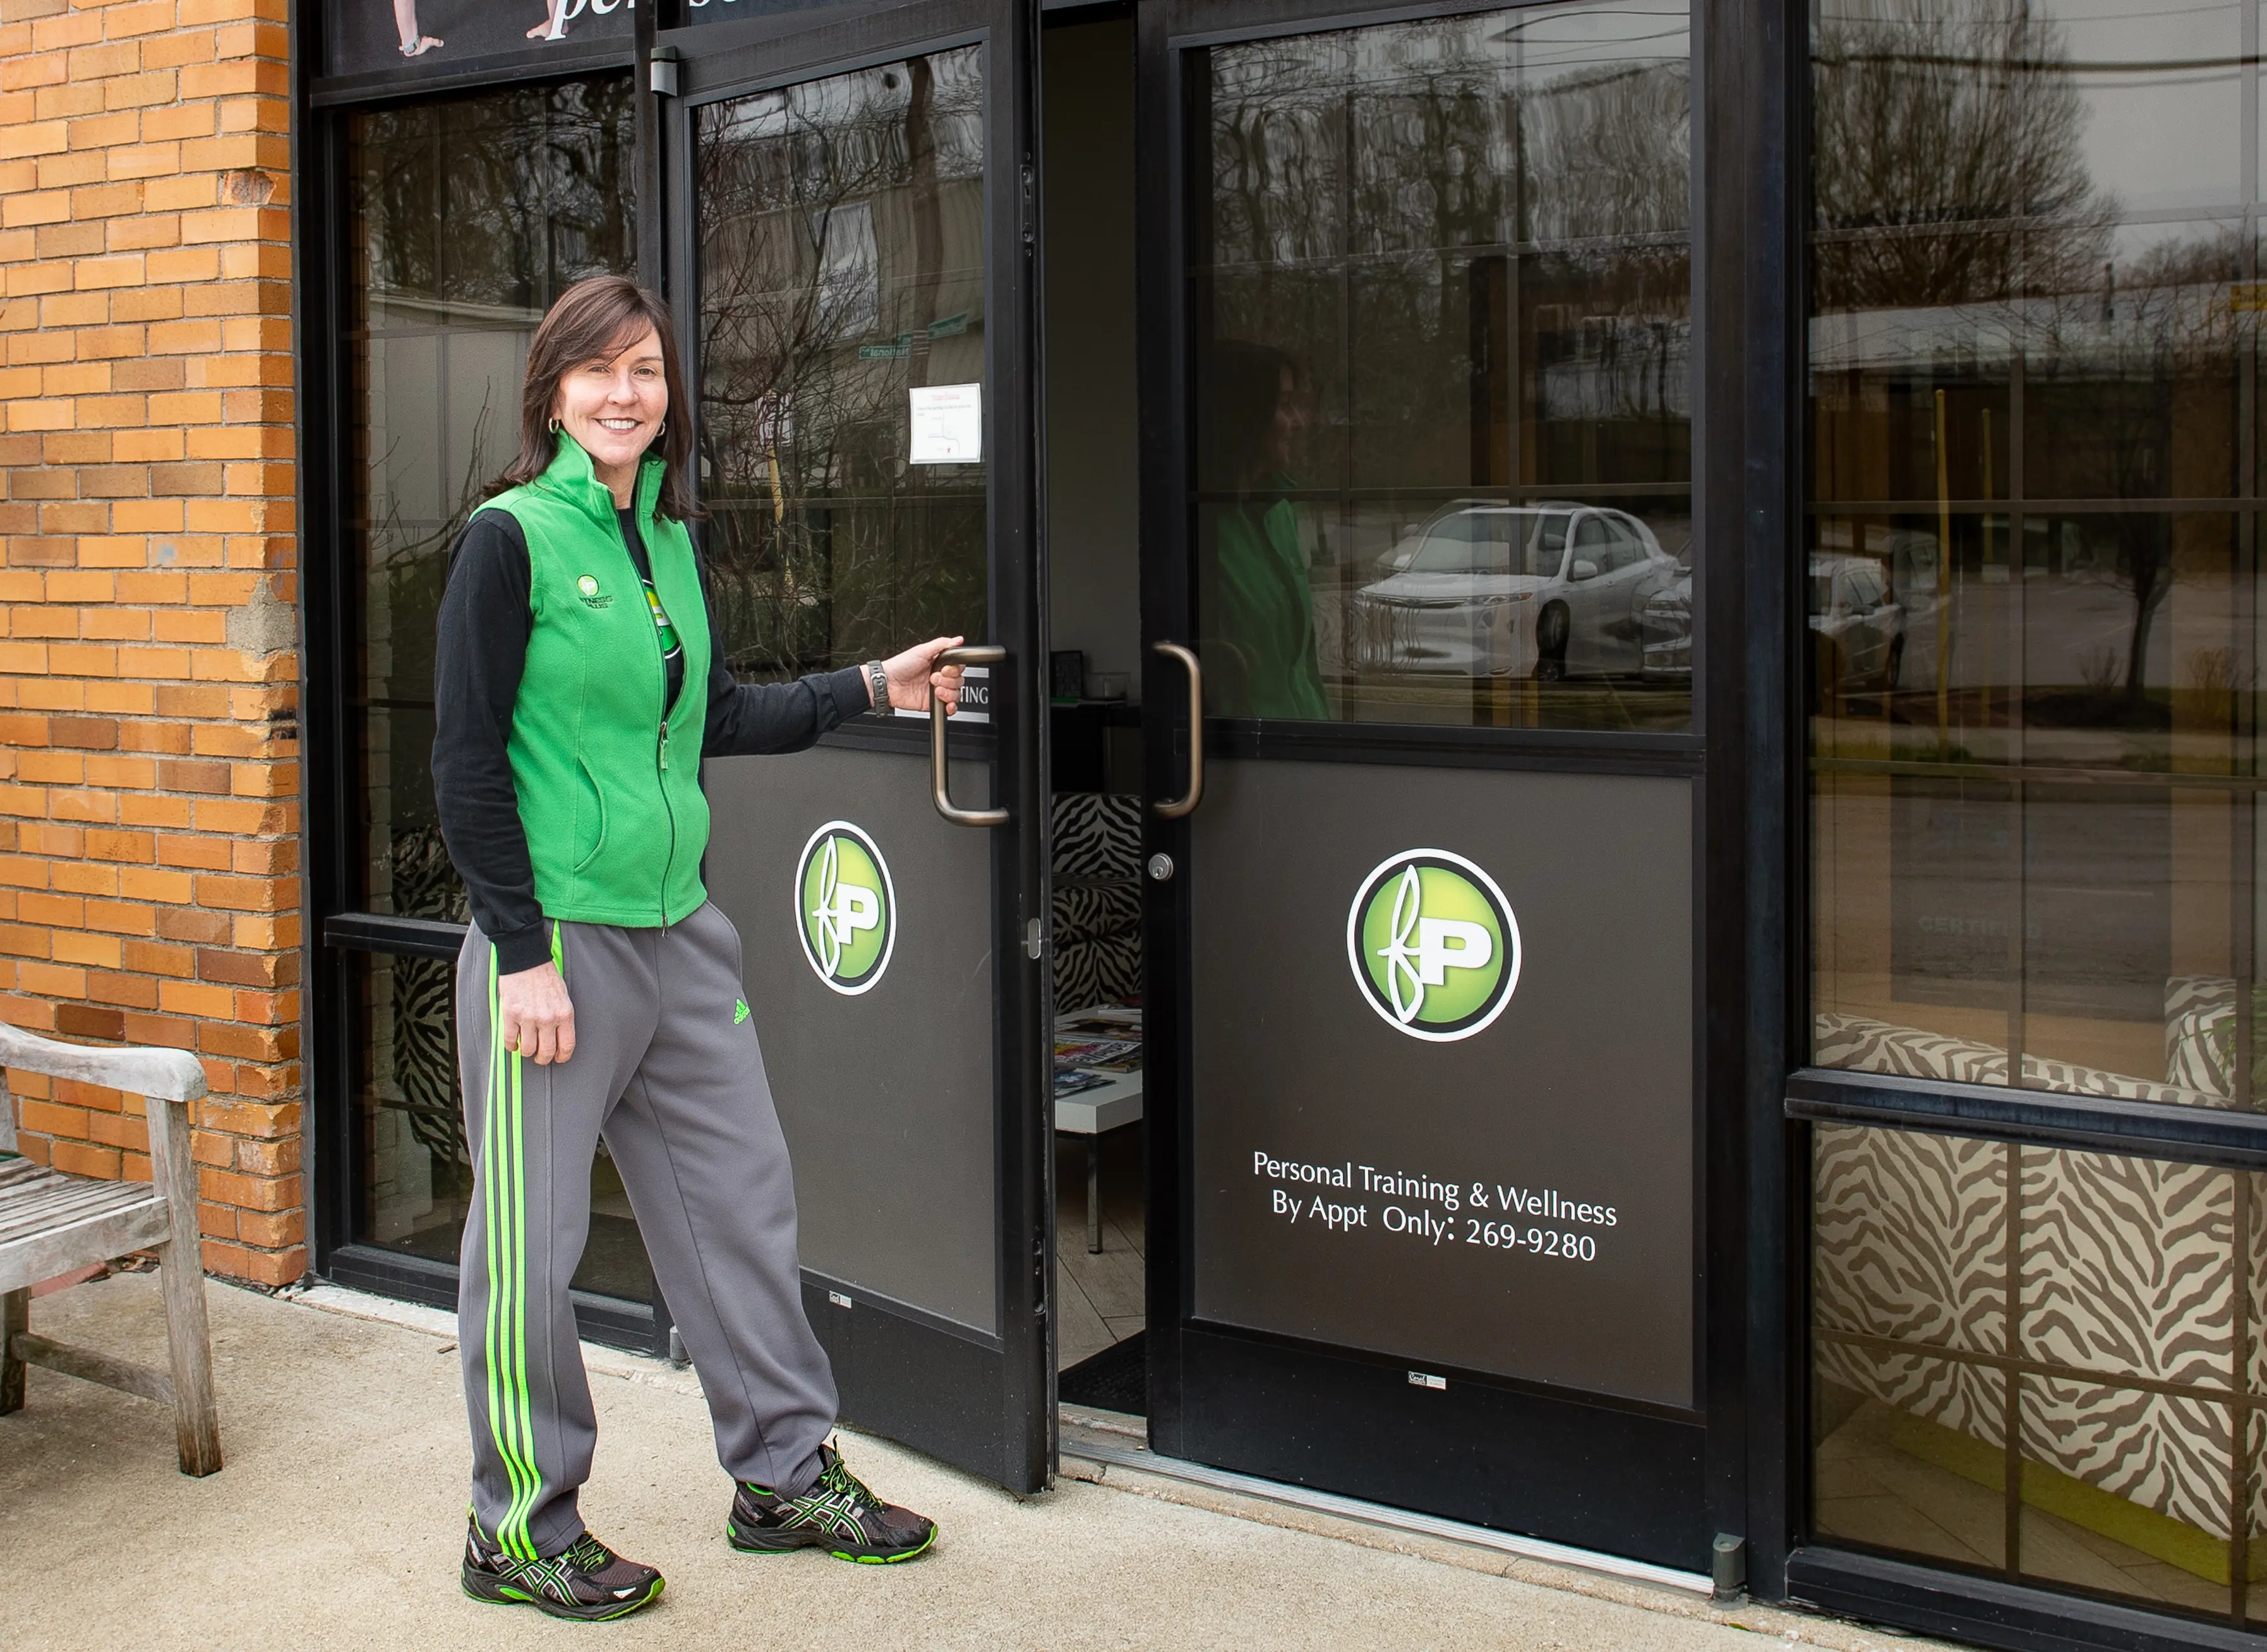 Sheila Kalas stands in front of the Fitness Plus Personal Training Studio